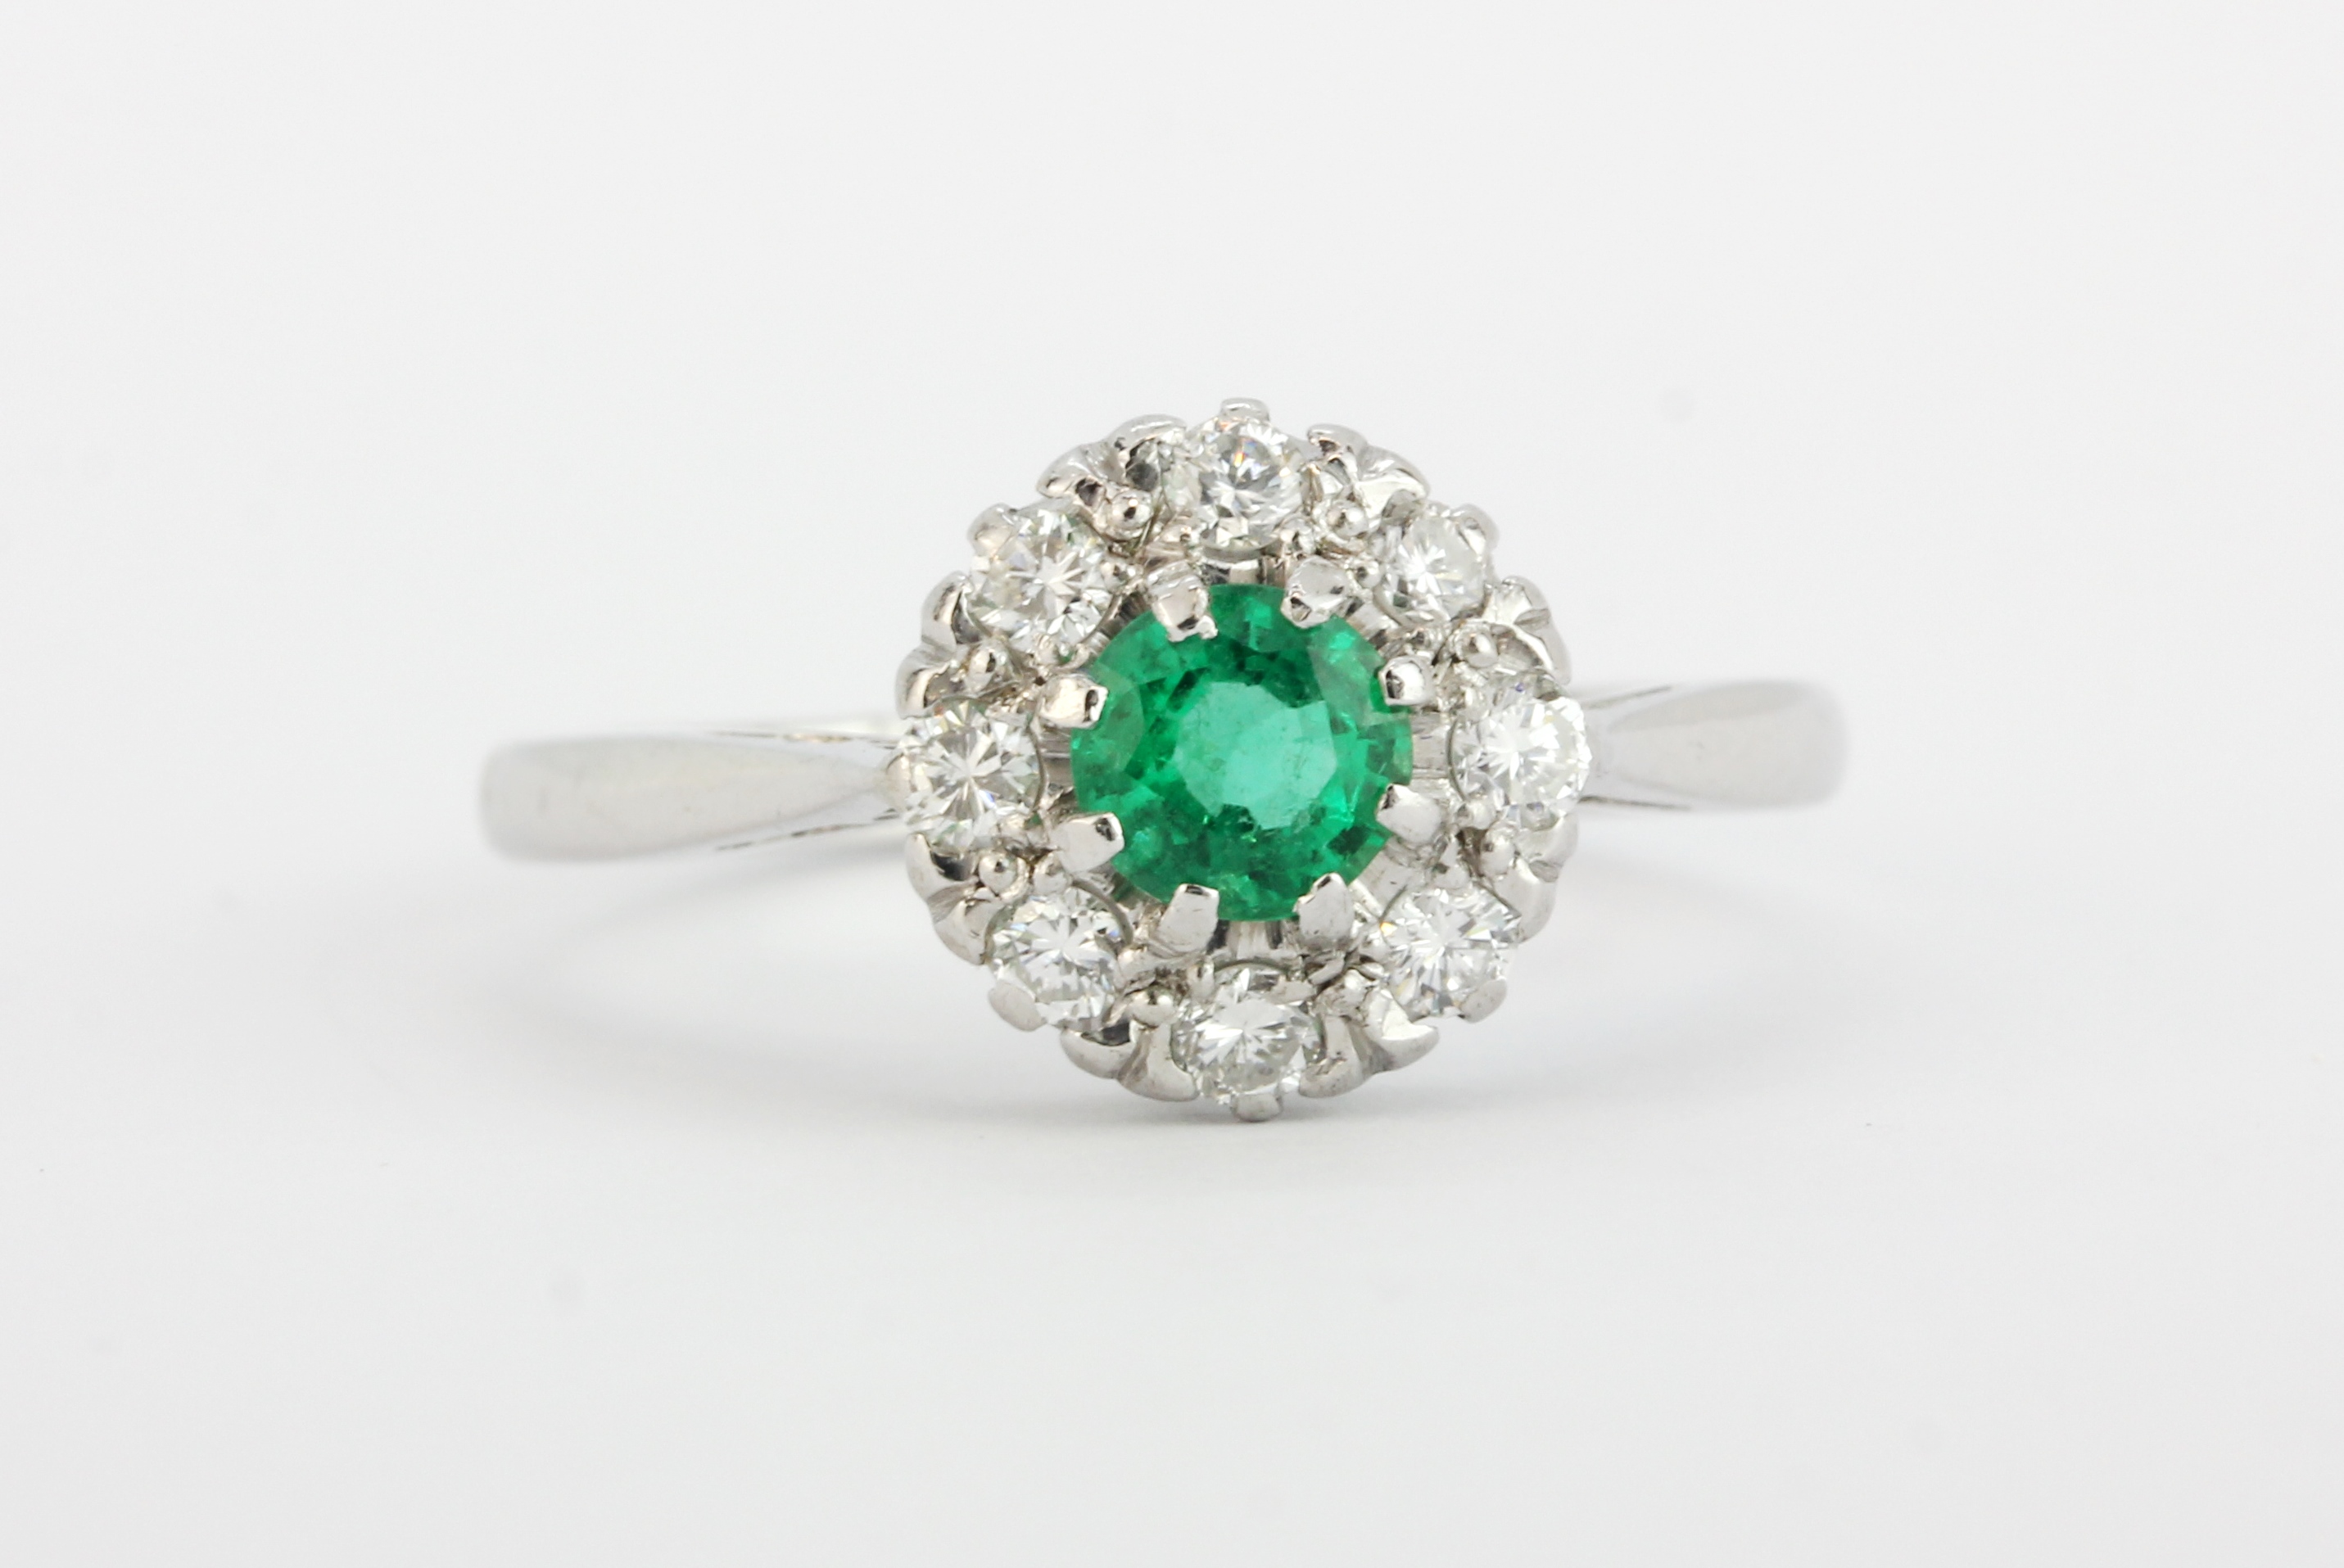 An 18ct white gold and platinum cluster ring set with a round cut emerald surrounded by brilliant